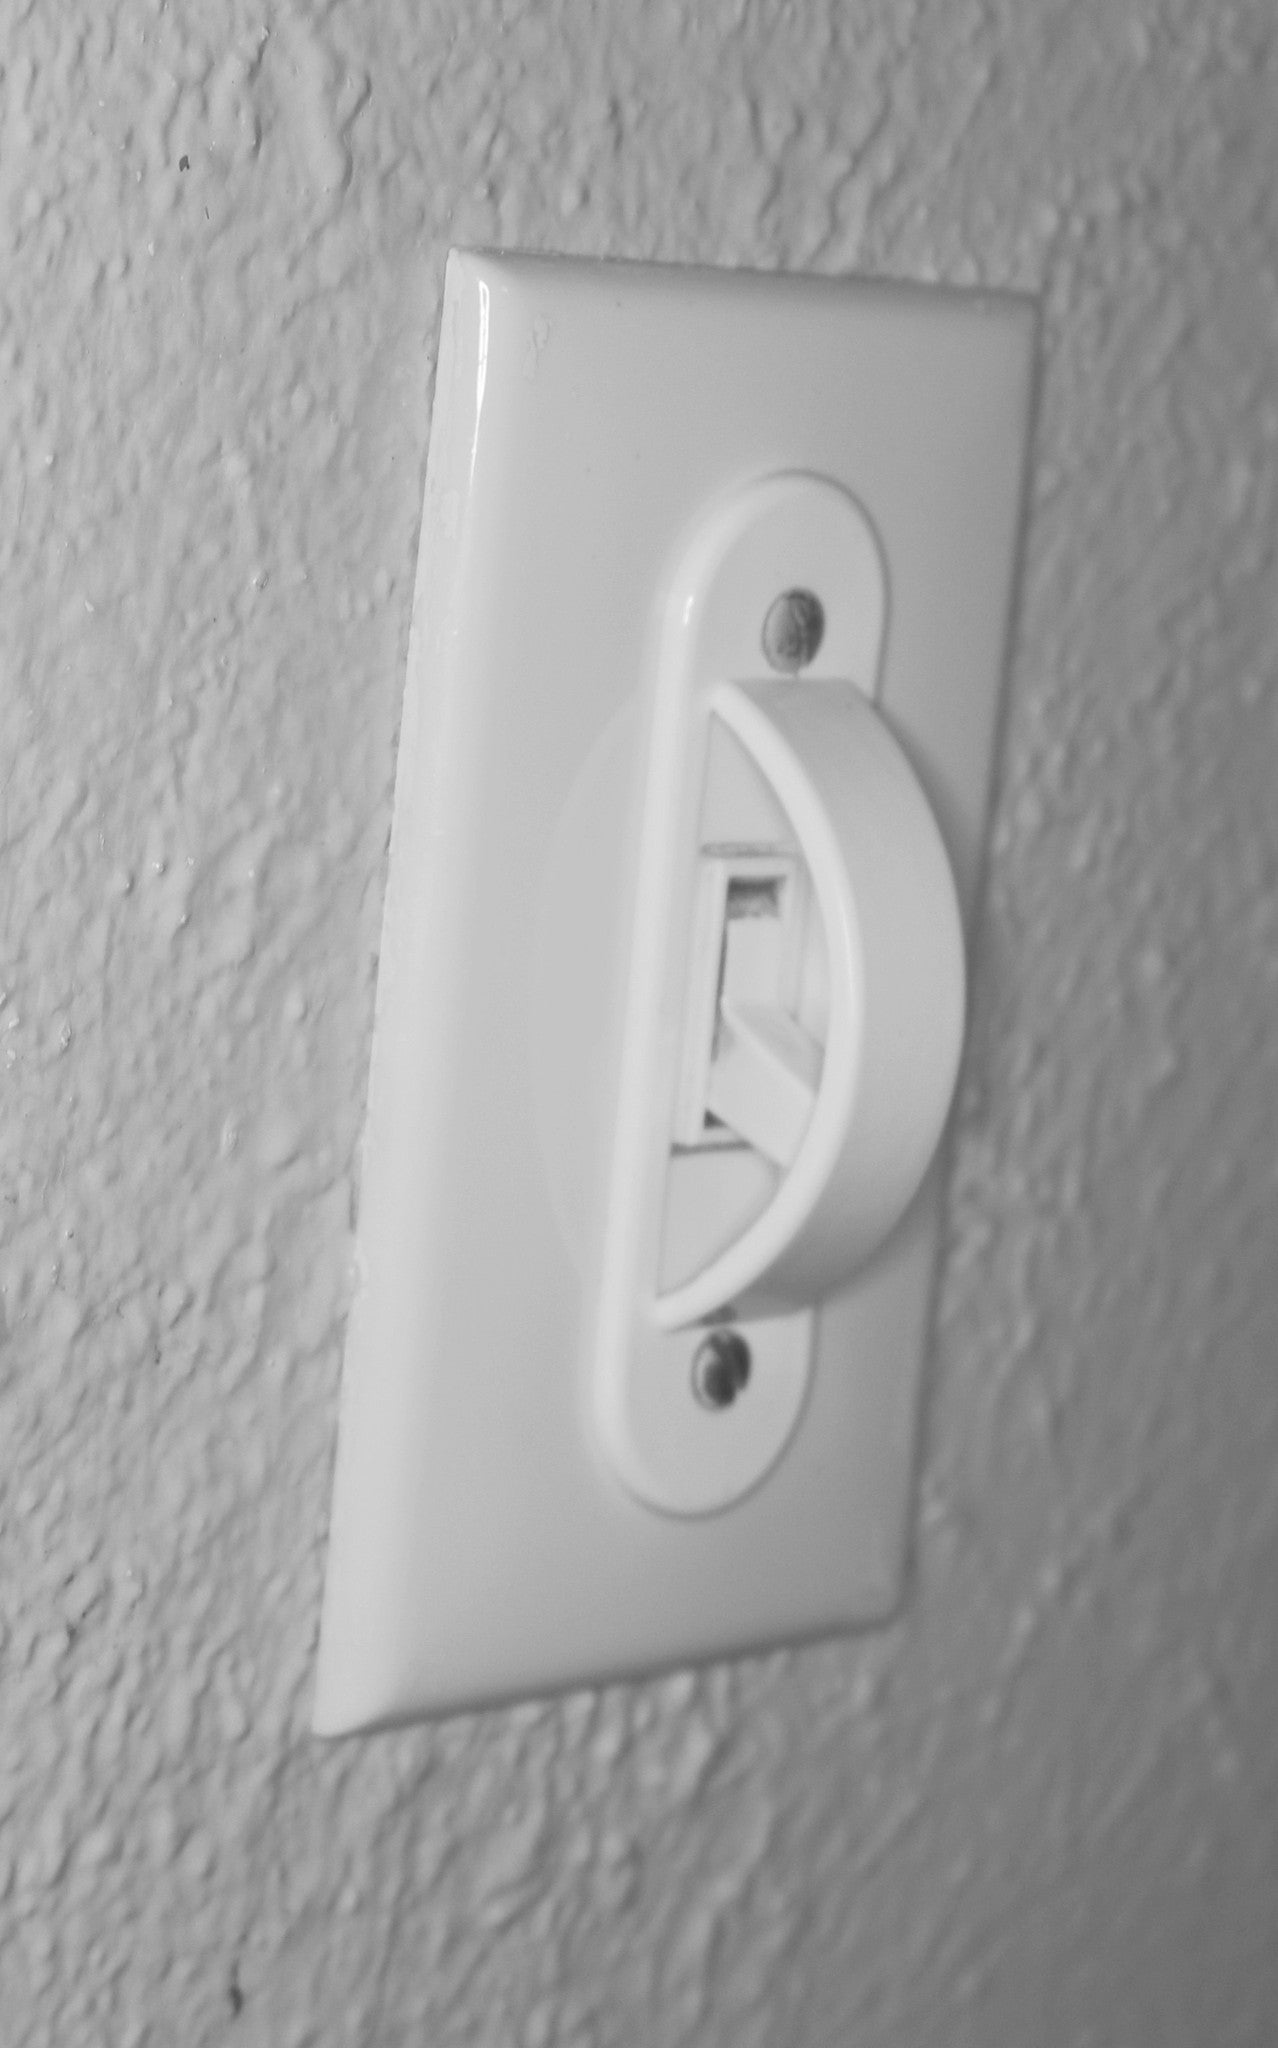 White Switch Plate Cover Guard Keeps Light Switch ON or Off protects your lights or circuits from accidentally being turned on or off.